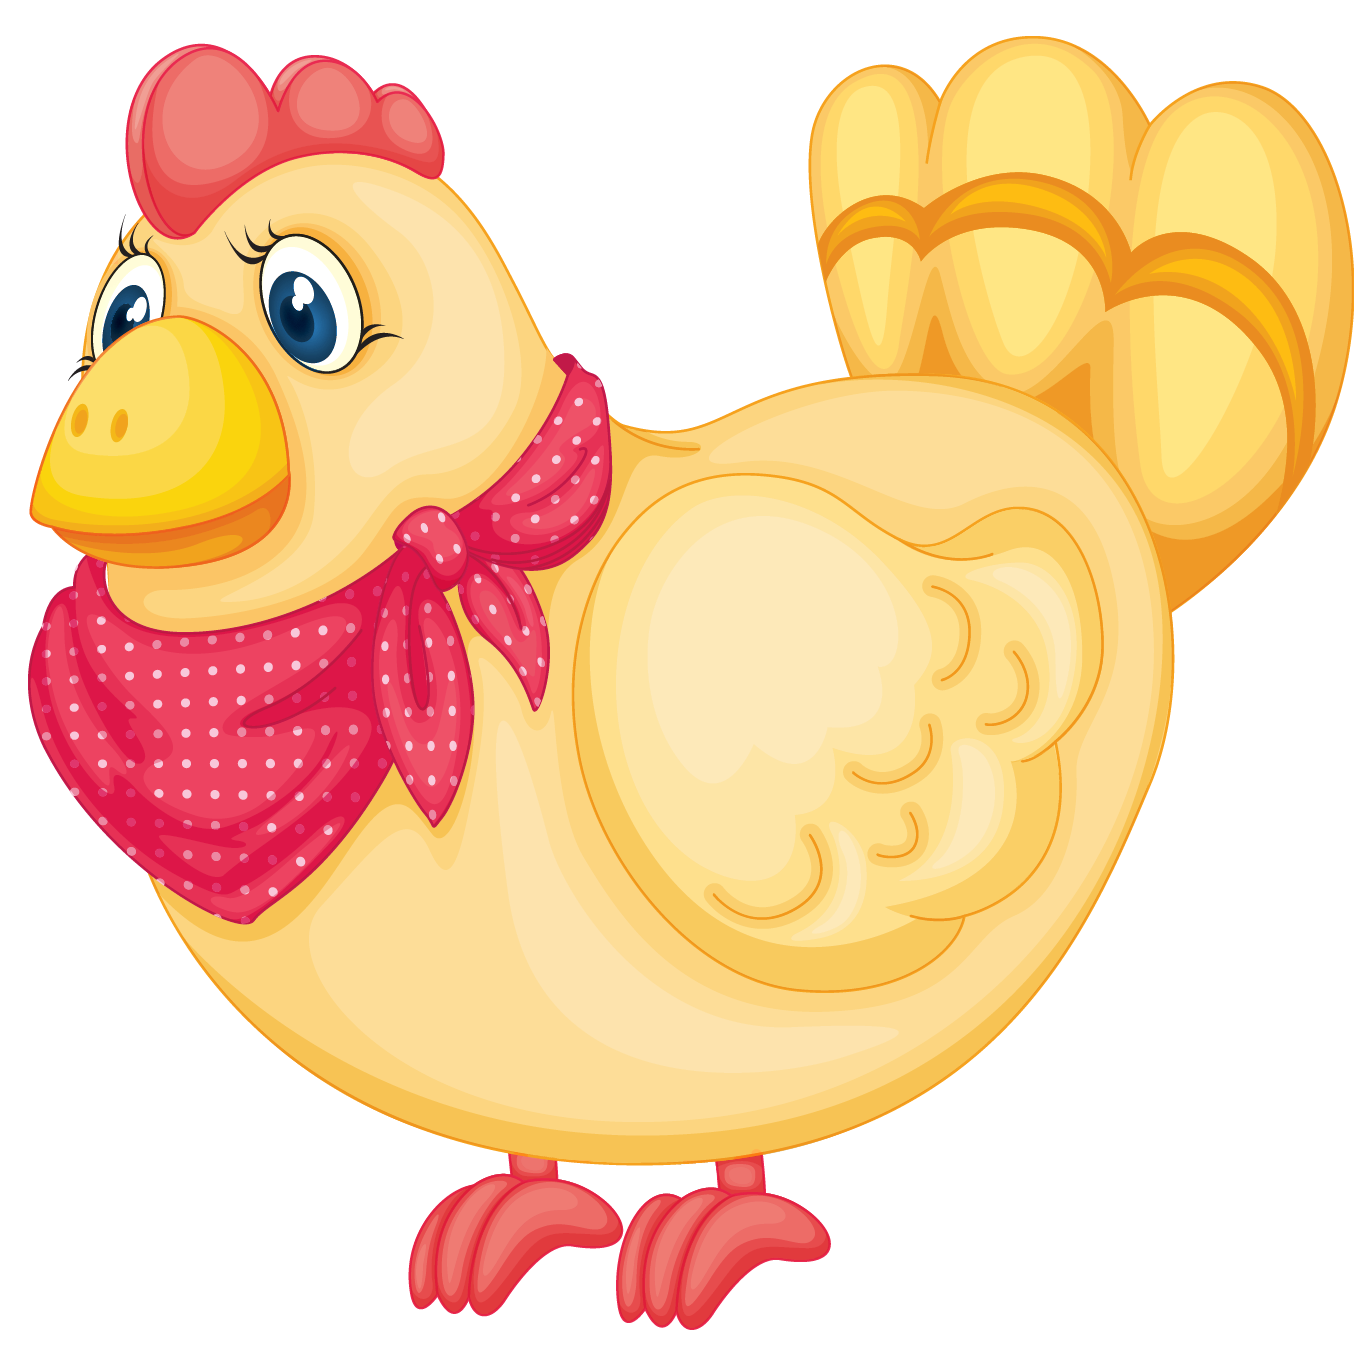 chicken meal clipart - photo #49